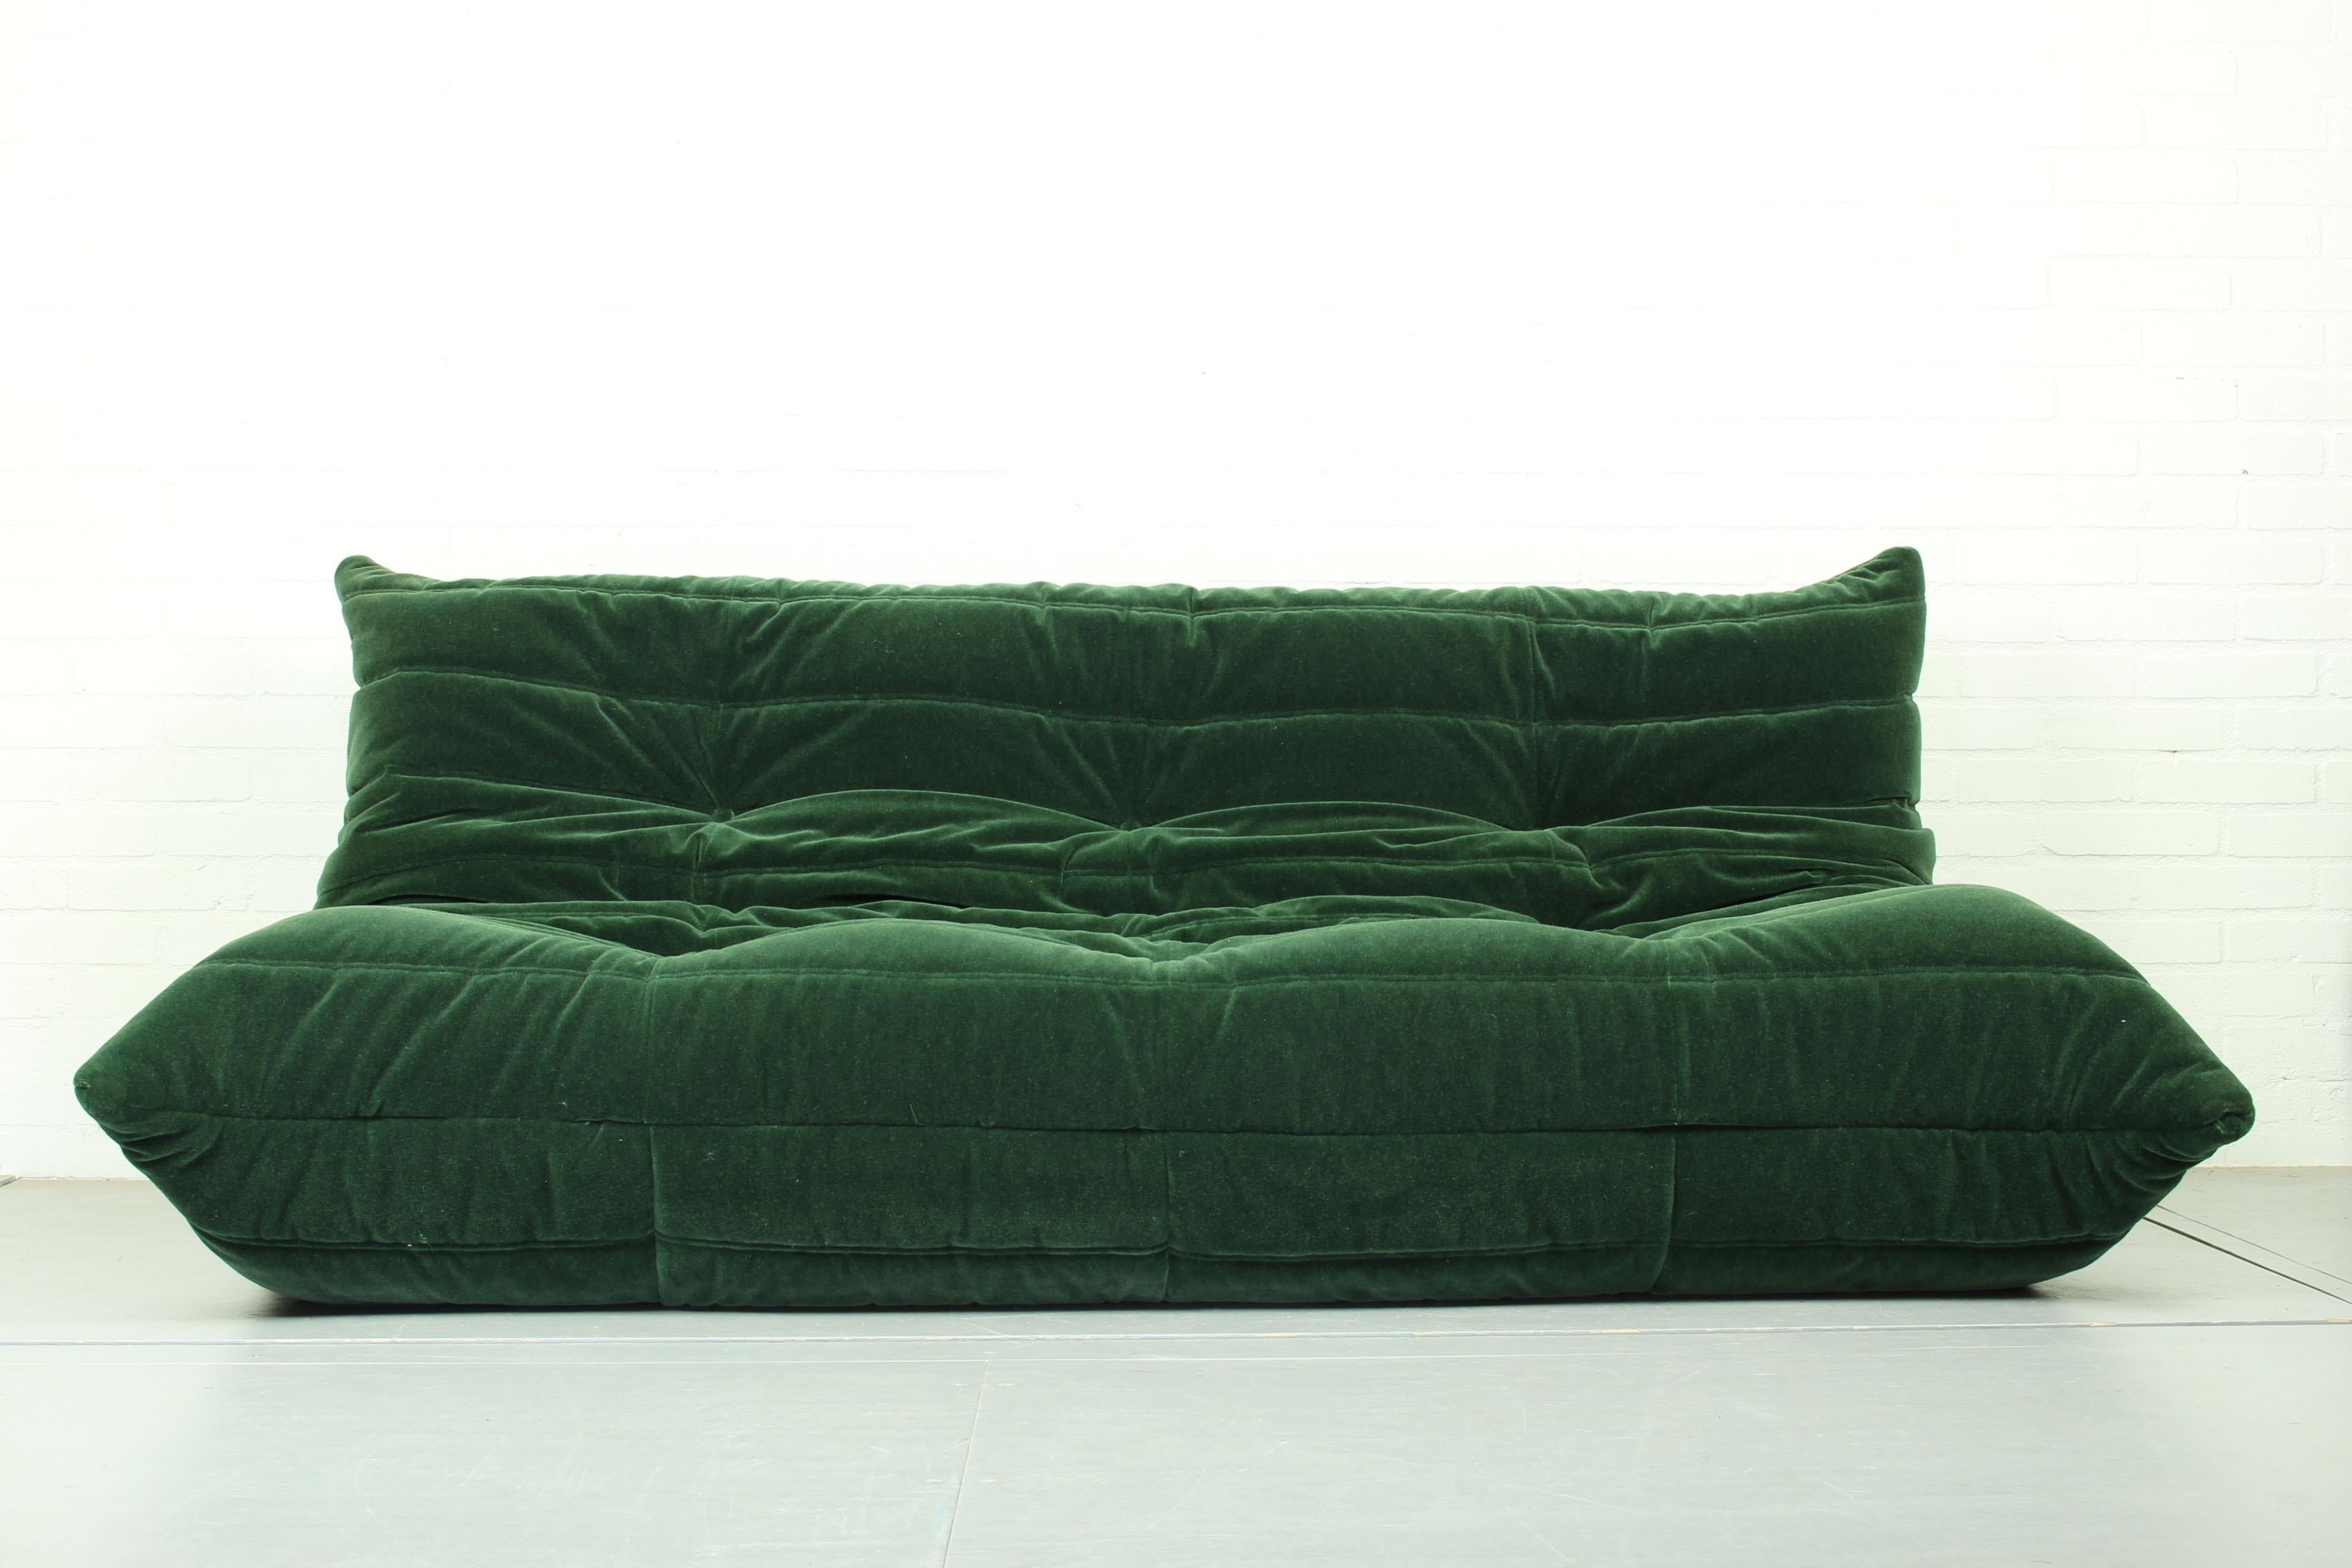 Togo sofa by Ligne Roset in excellent condition. Reupholstered in a high quality forrest green luxurious mohair supreme which gives a beautiful and rich effect. The Togo is The lounge sofa. It has an ergonomic design, multiple density polyether foam